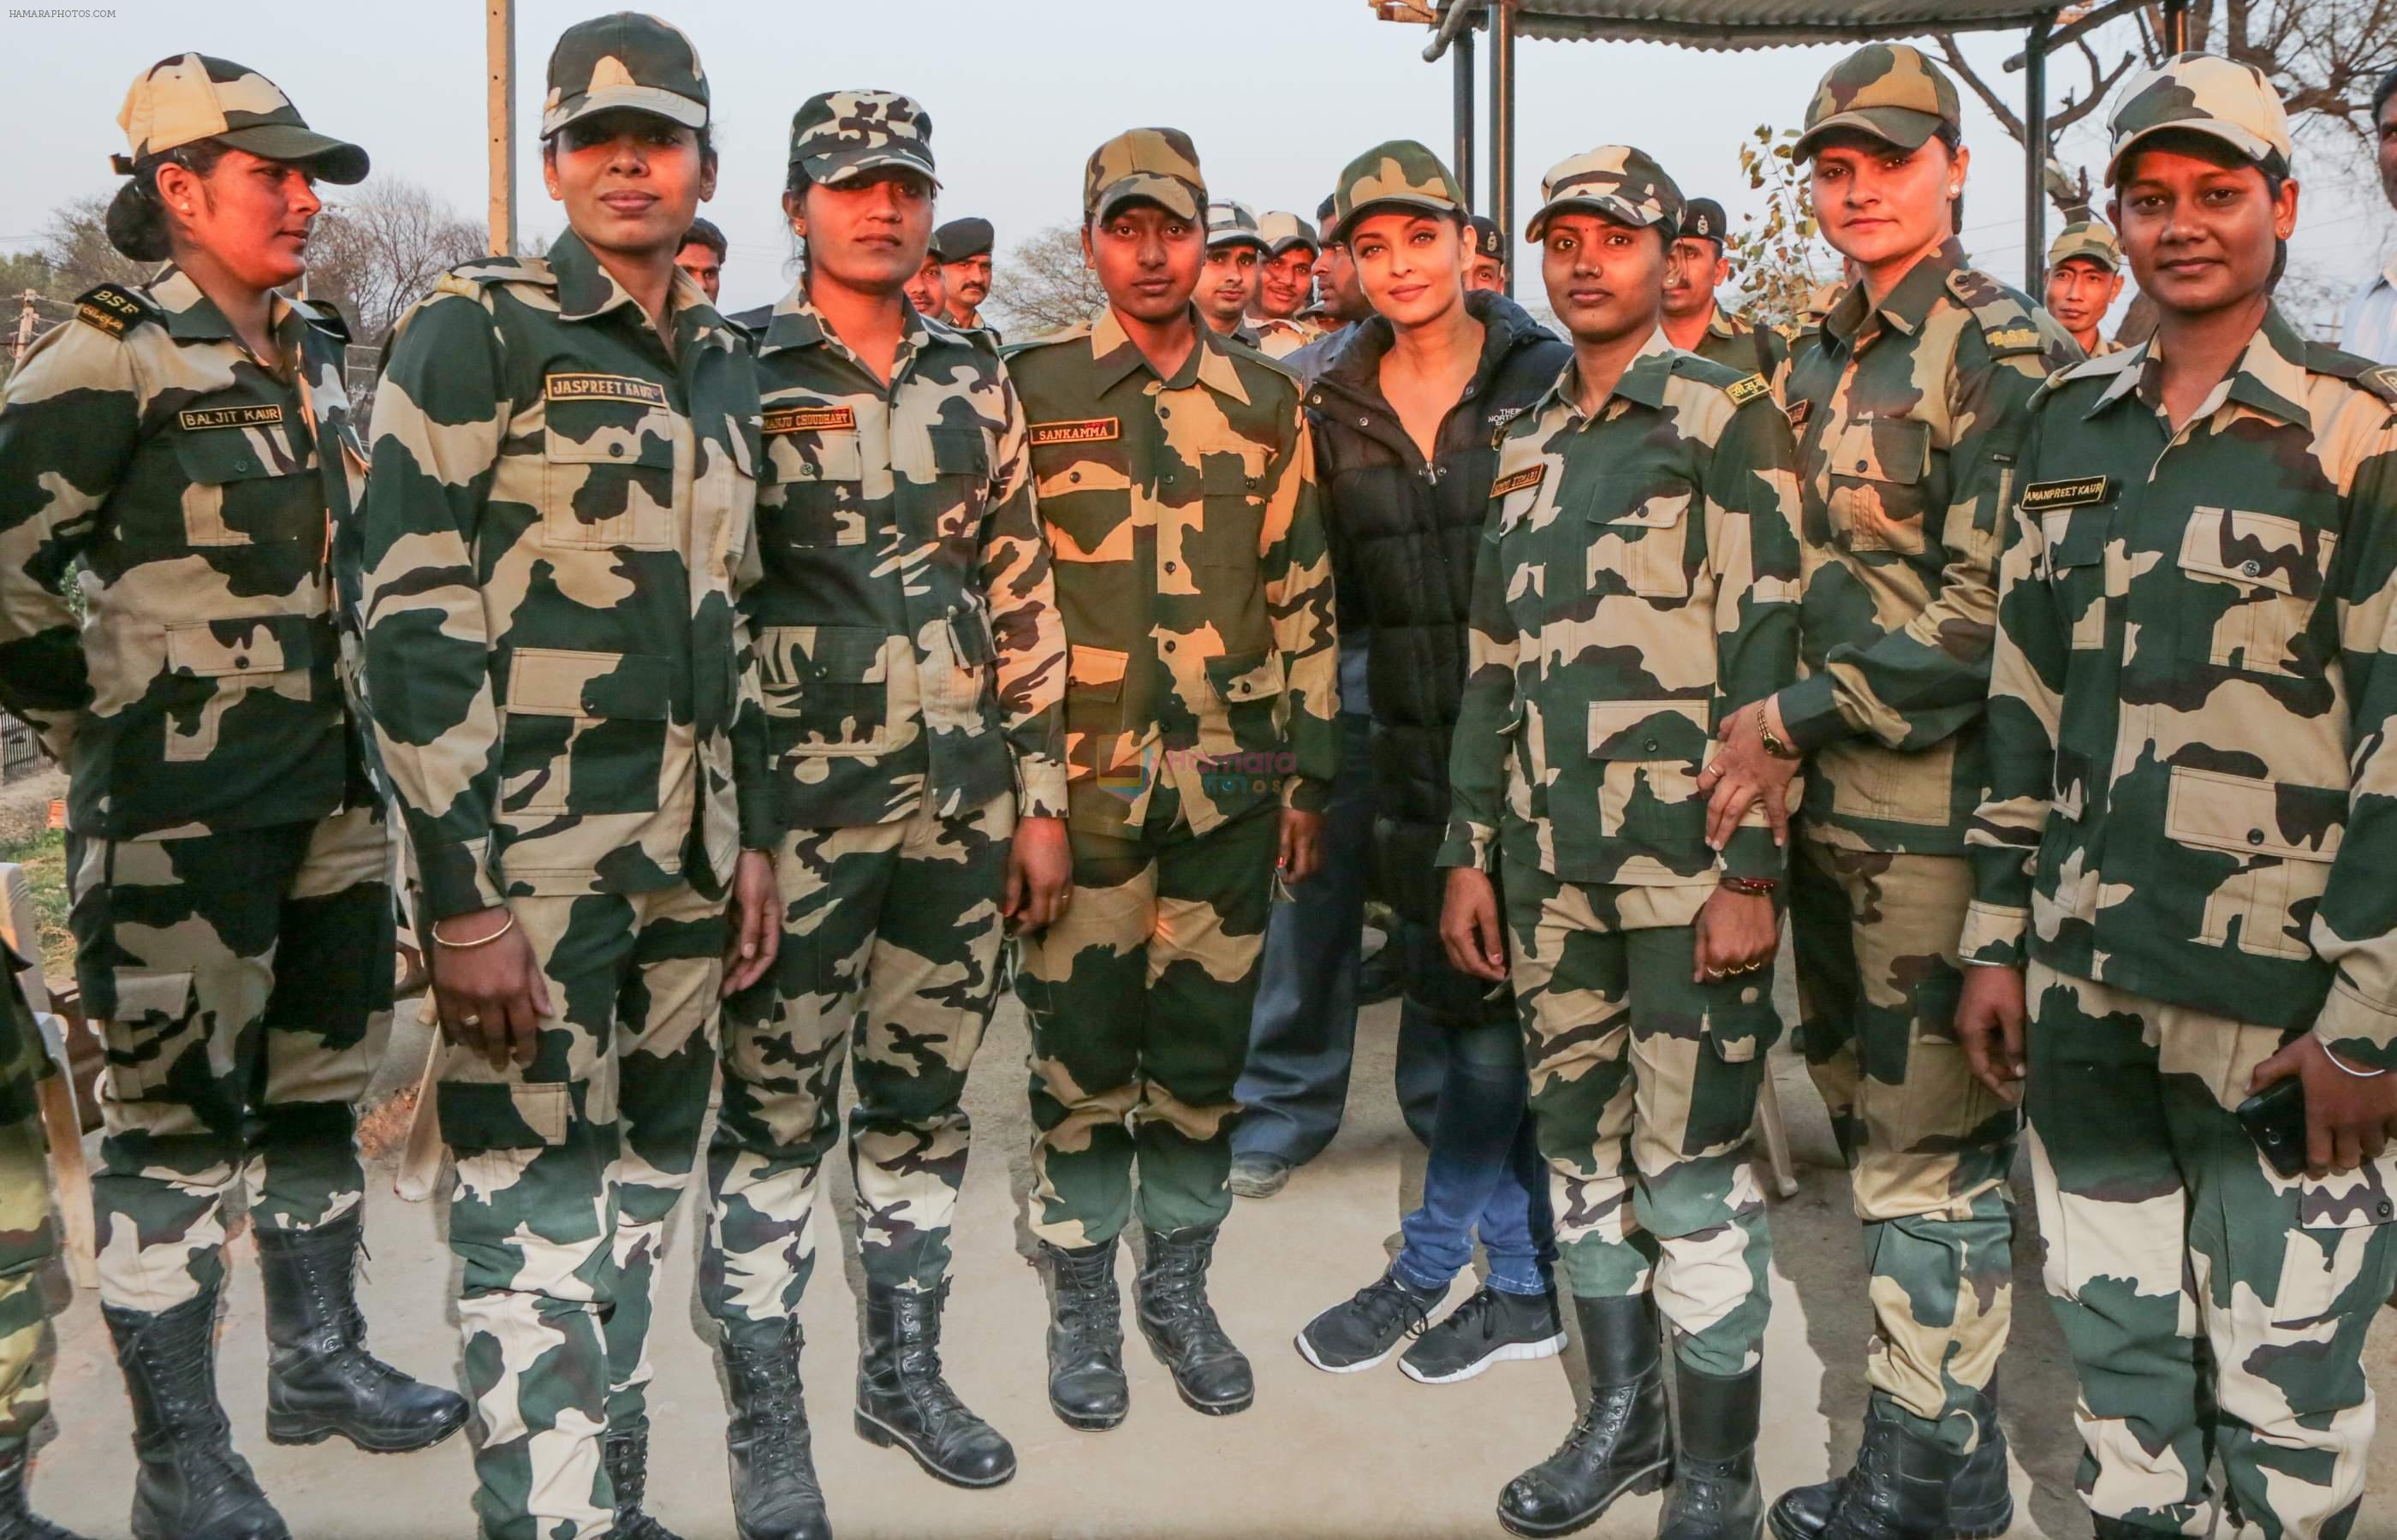 Aishwarya Rai Bachchan spends time with BSF soldiers on 25th Feb 2016